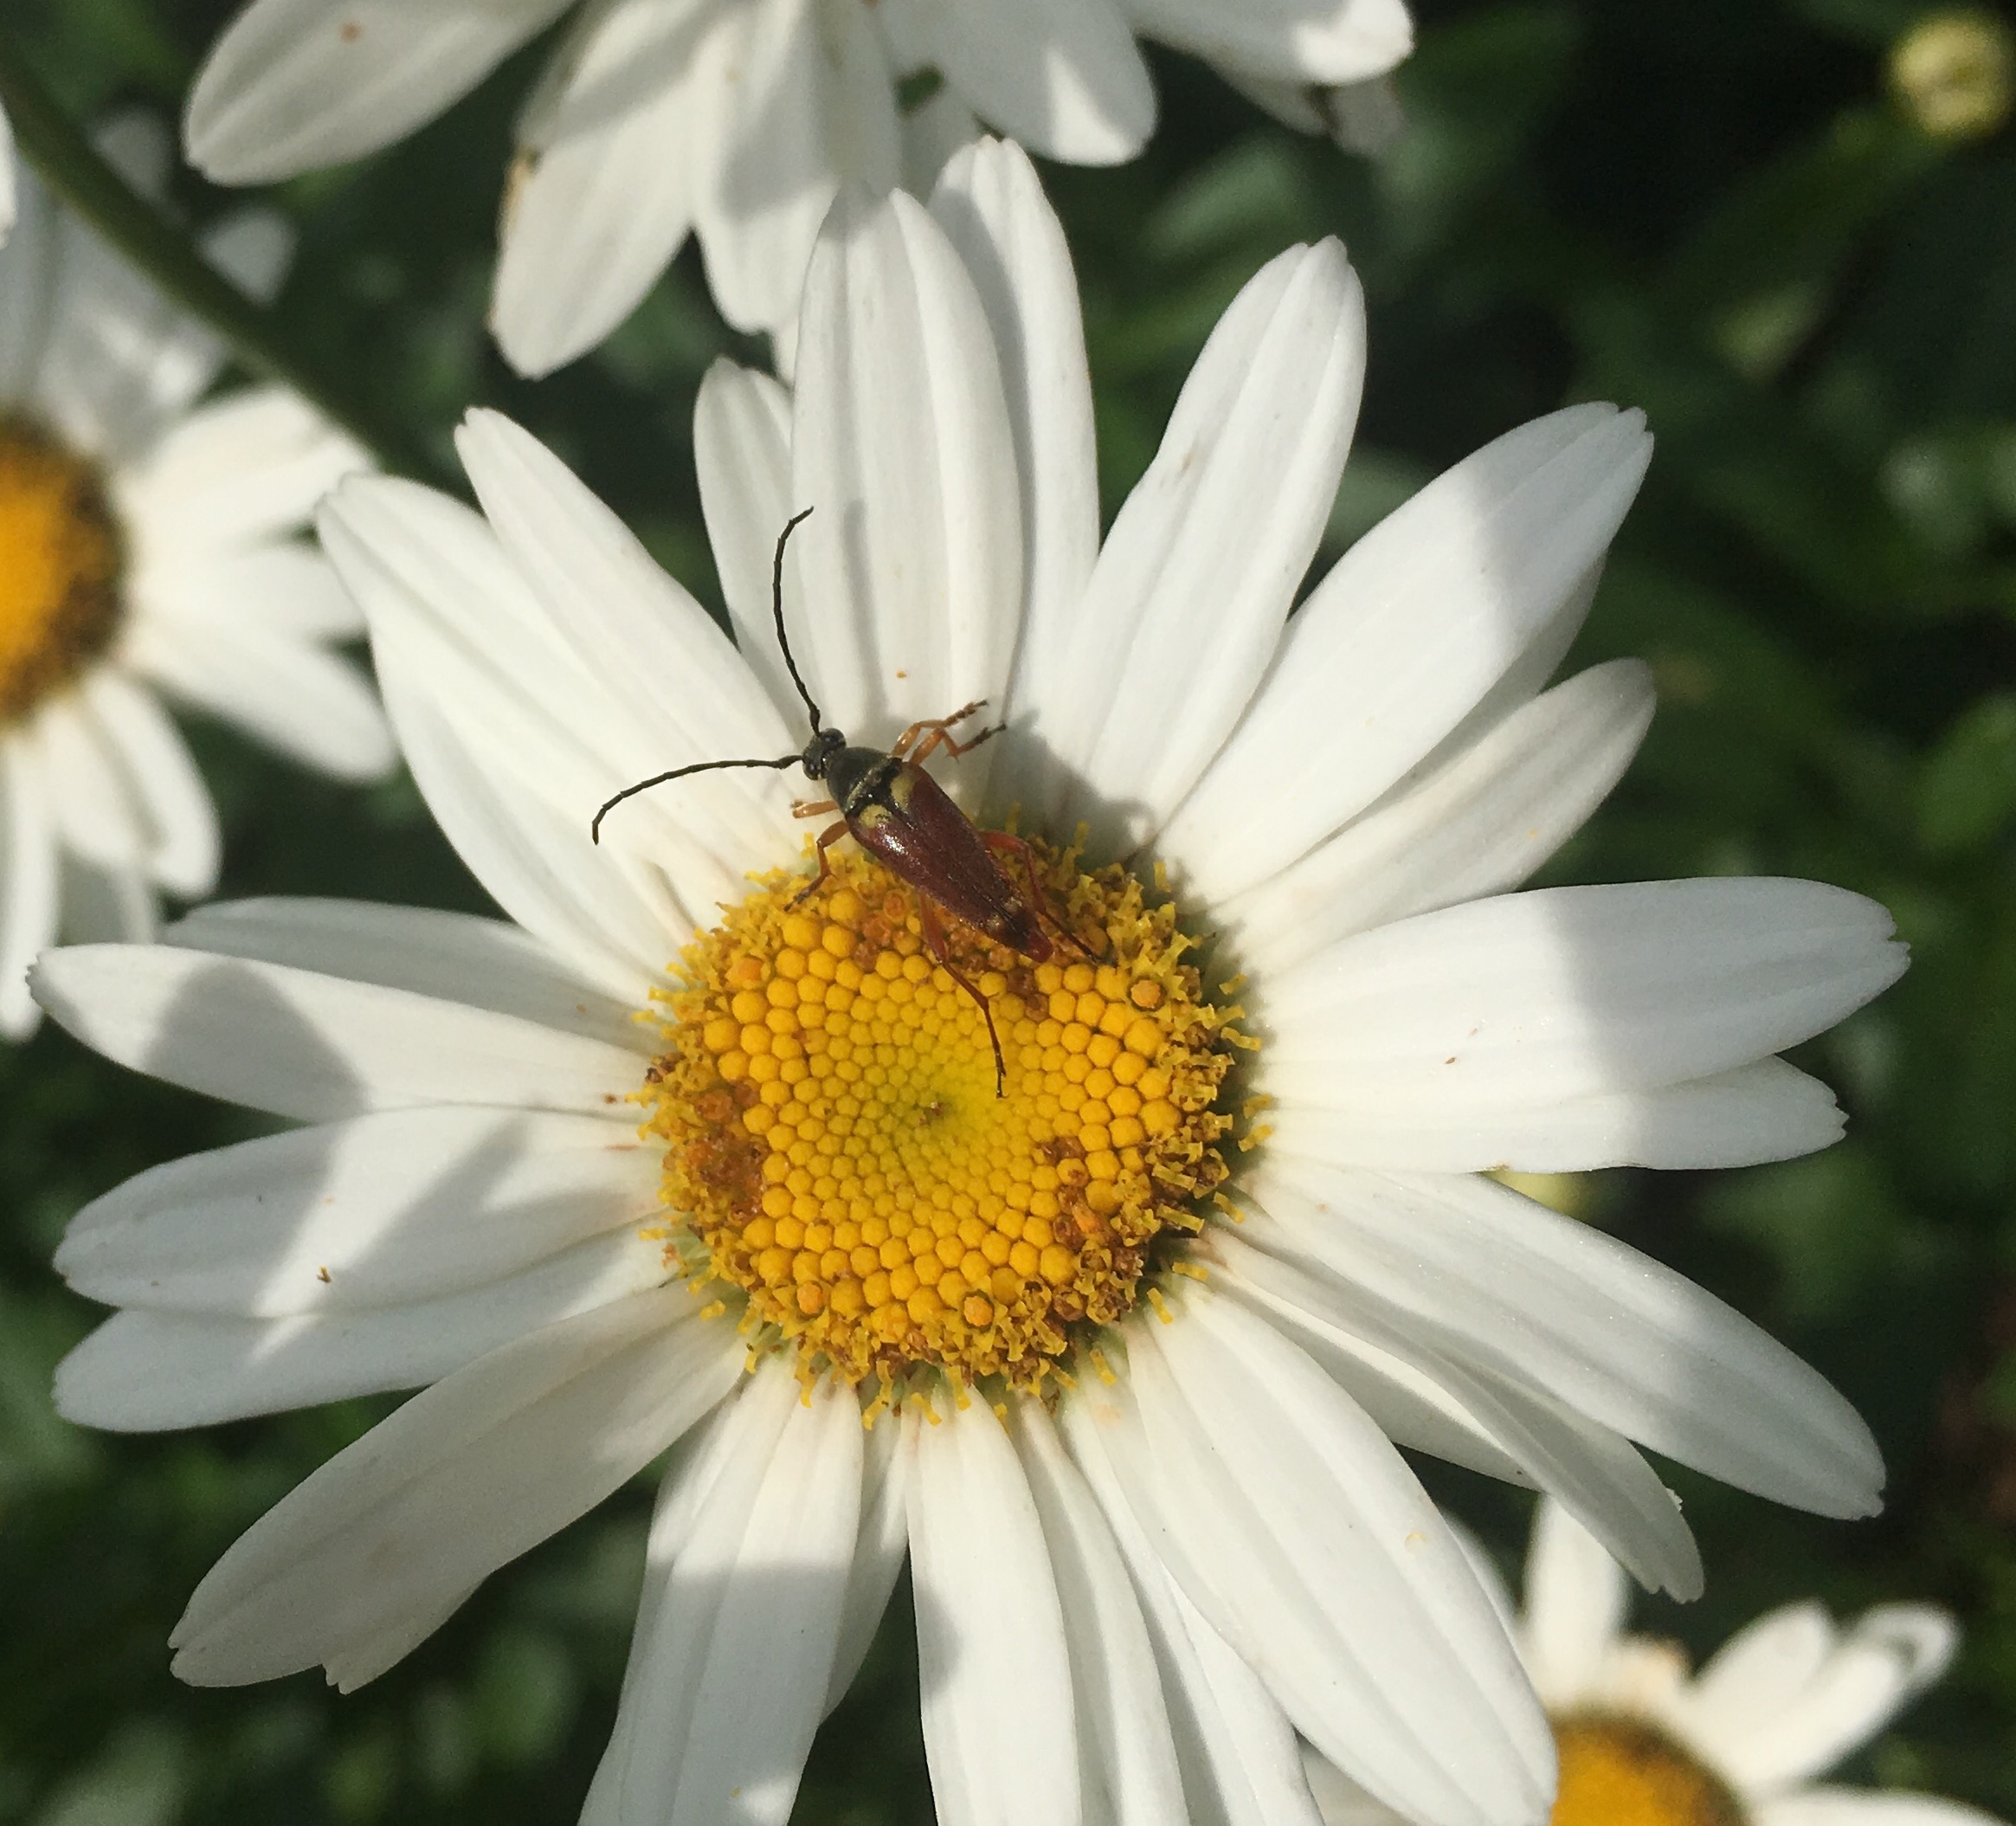 Bob's bugs: Insect identification guide, Wellesley MA | The ...